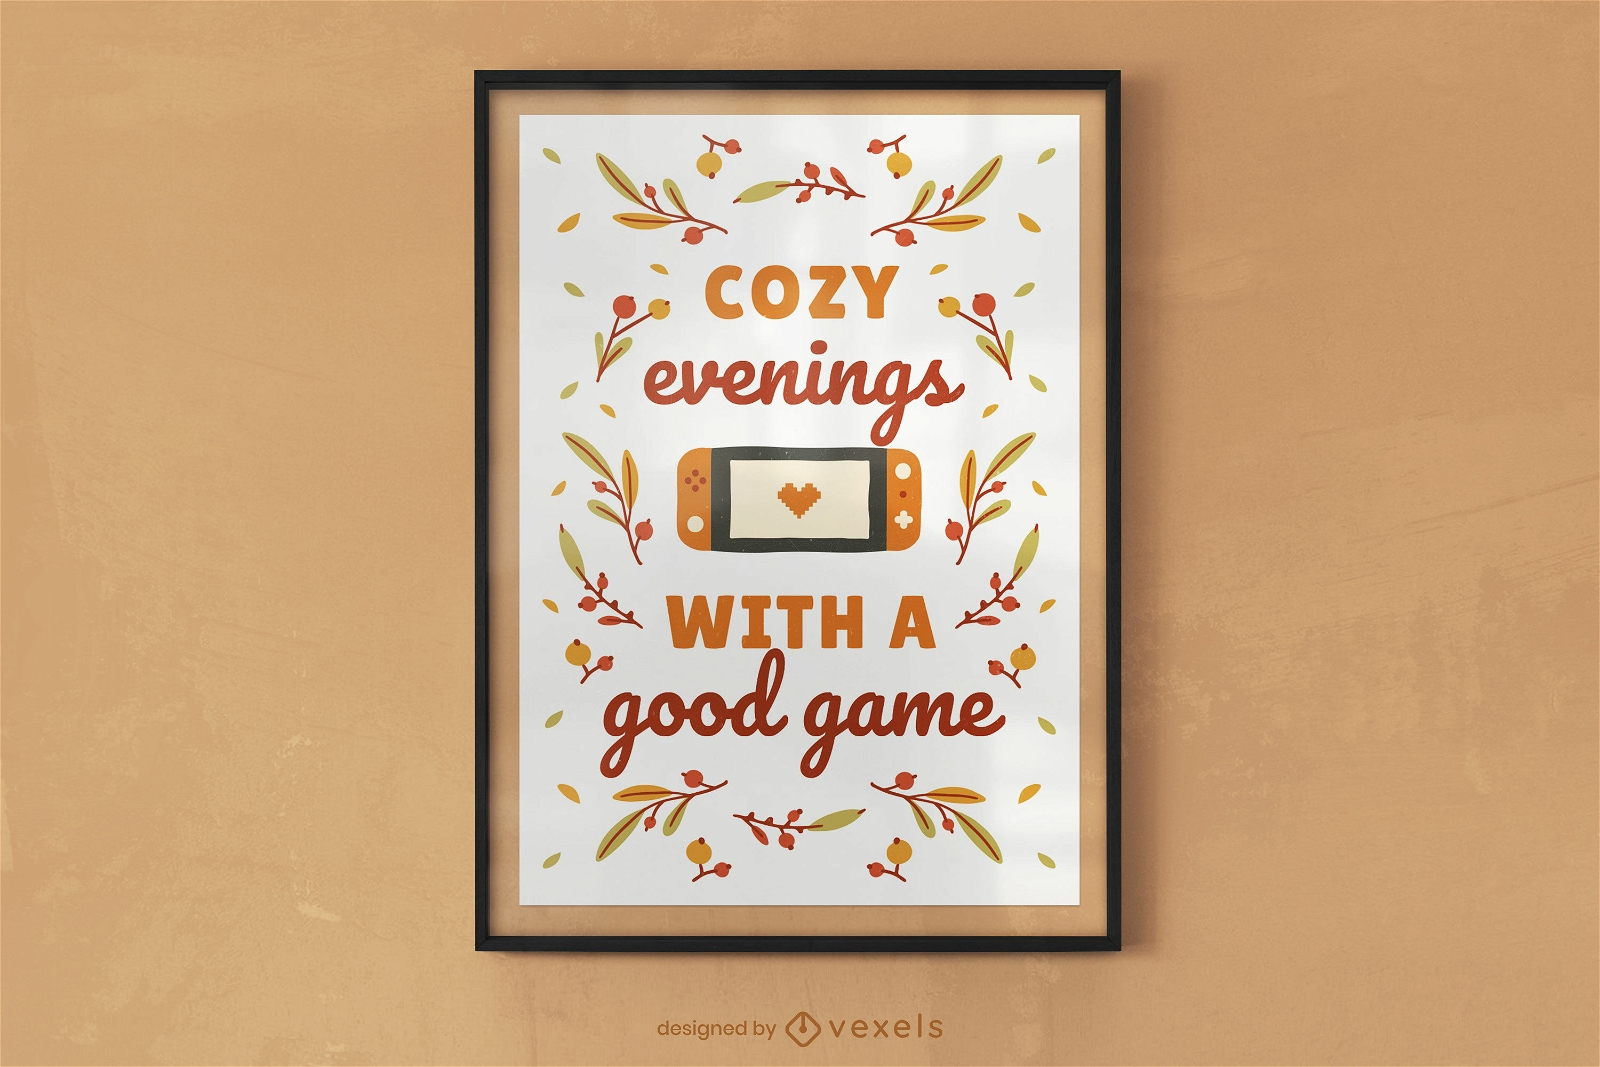 Cozy evenings gaming poster design